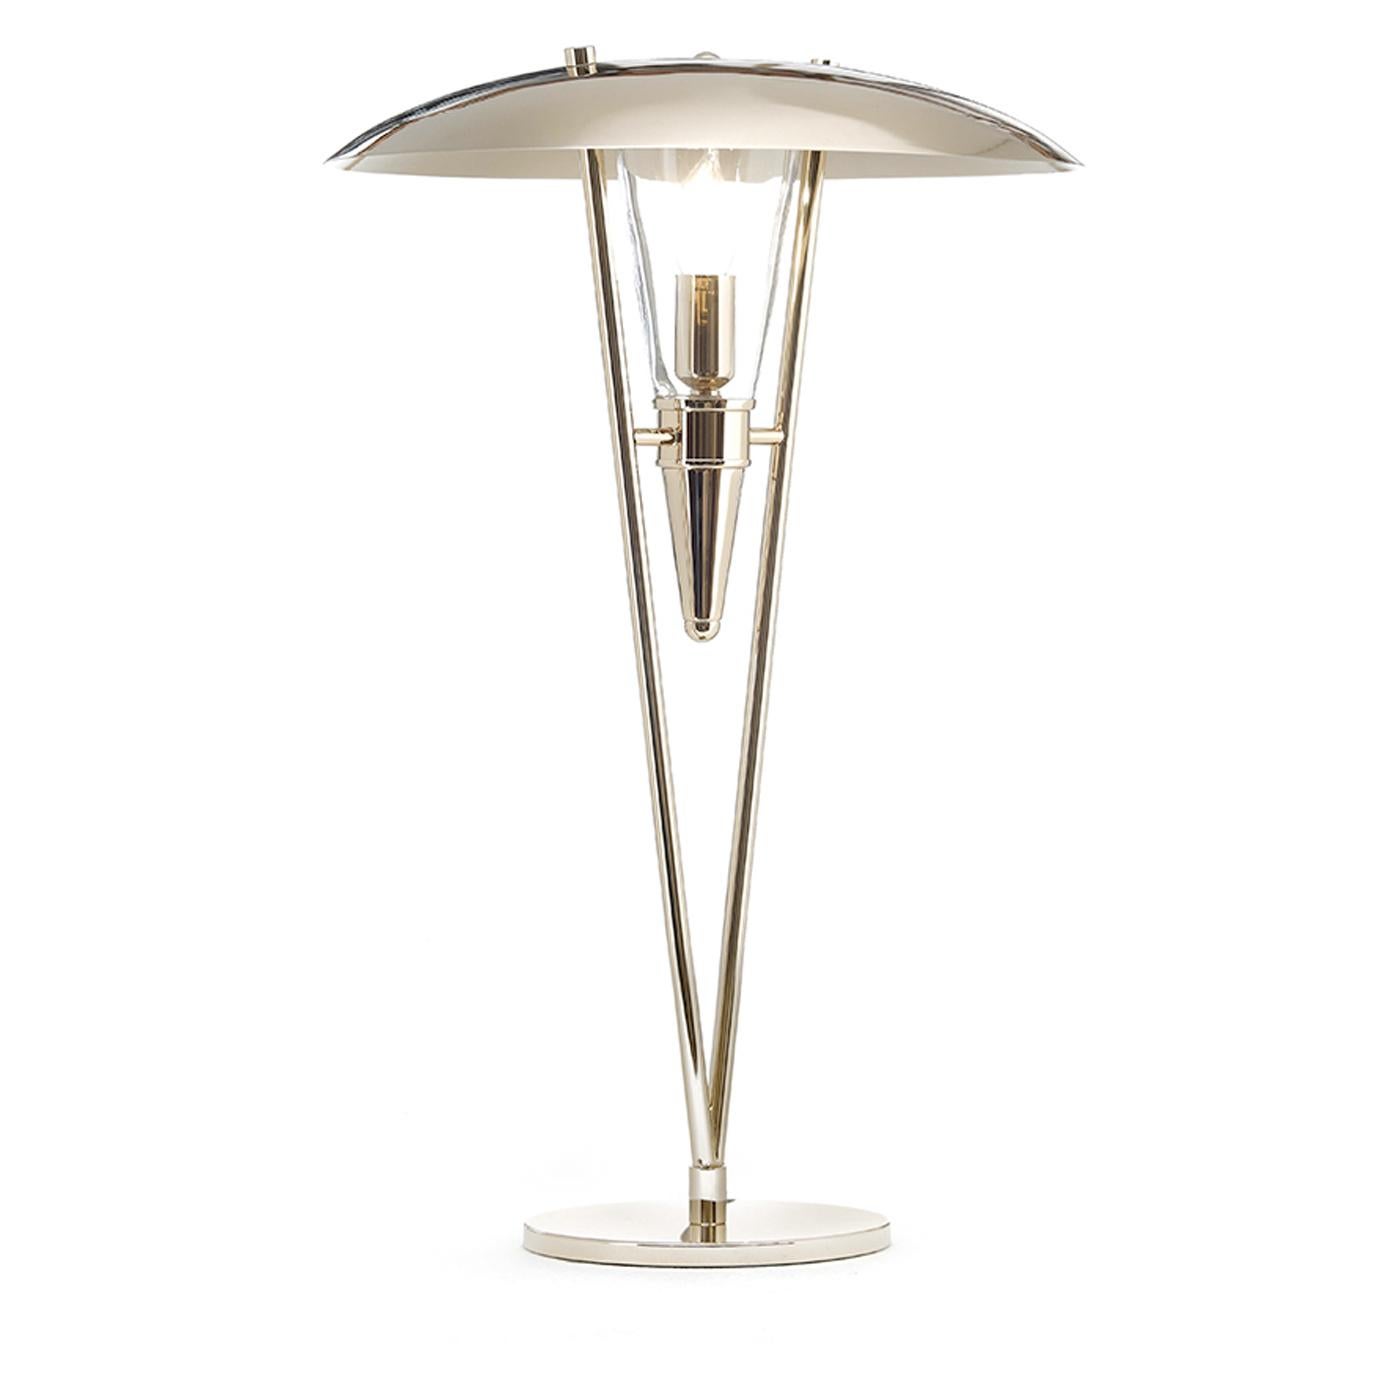 Part of the Art Deco collection, inspired by the geometric rigor and bold silhouettes of home decor from the 1930s and 1940s, this metal table lamp's frame has a striking gold finish, handmade by skillful craftsmen. The round base supports a